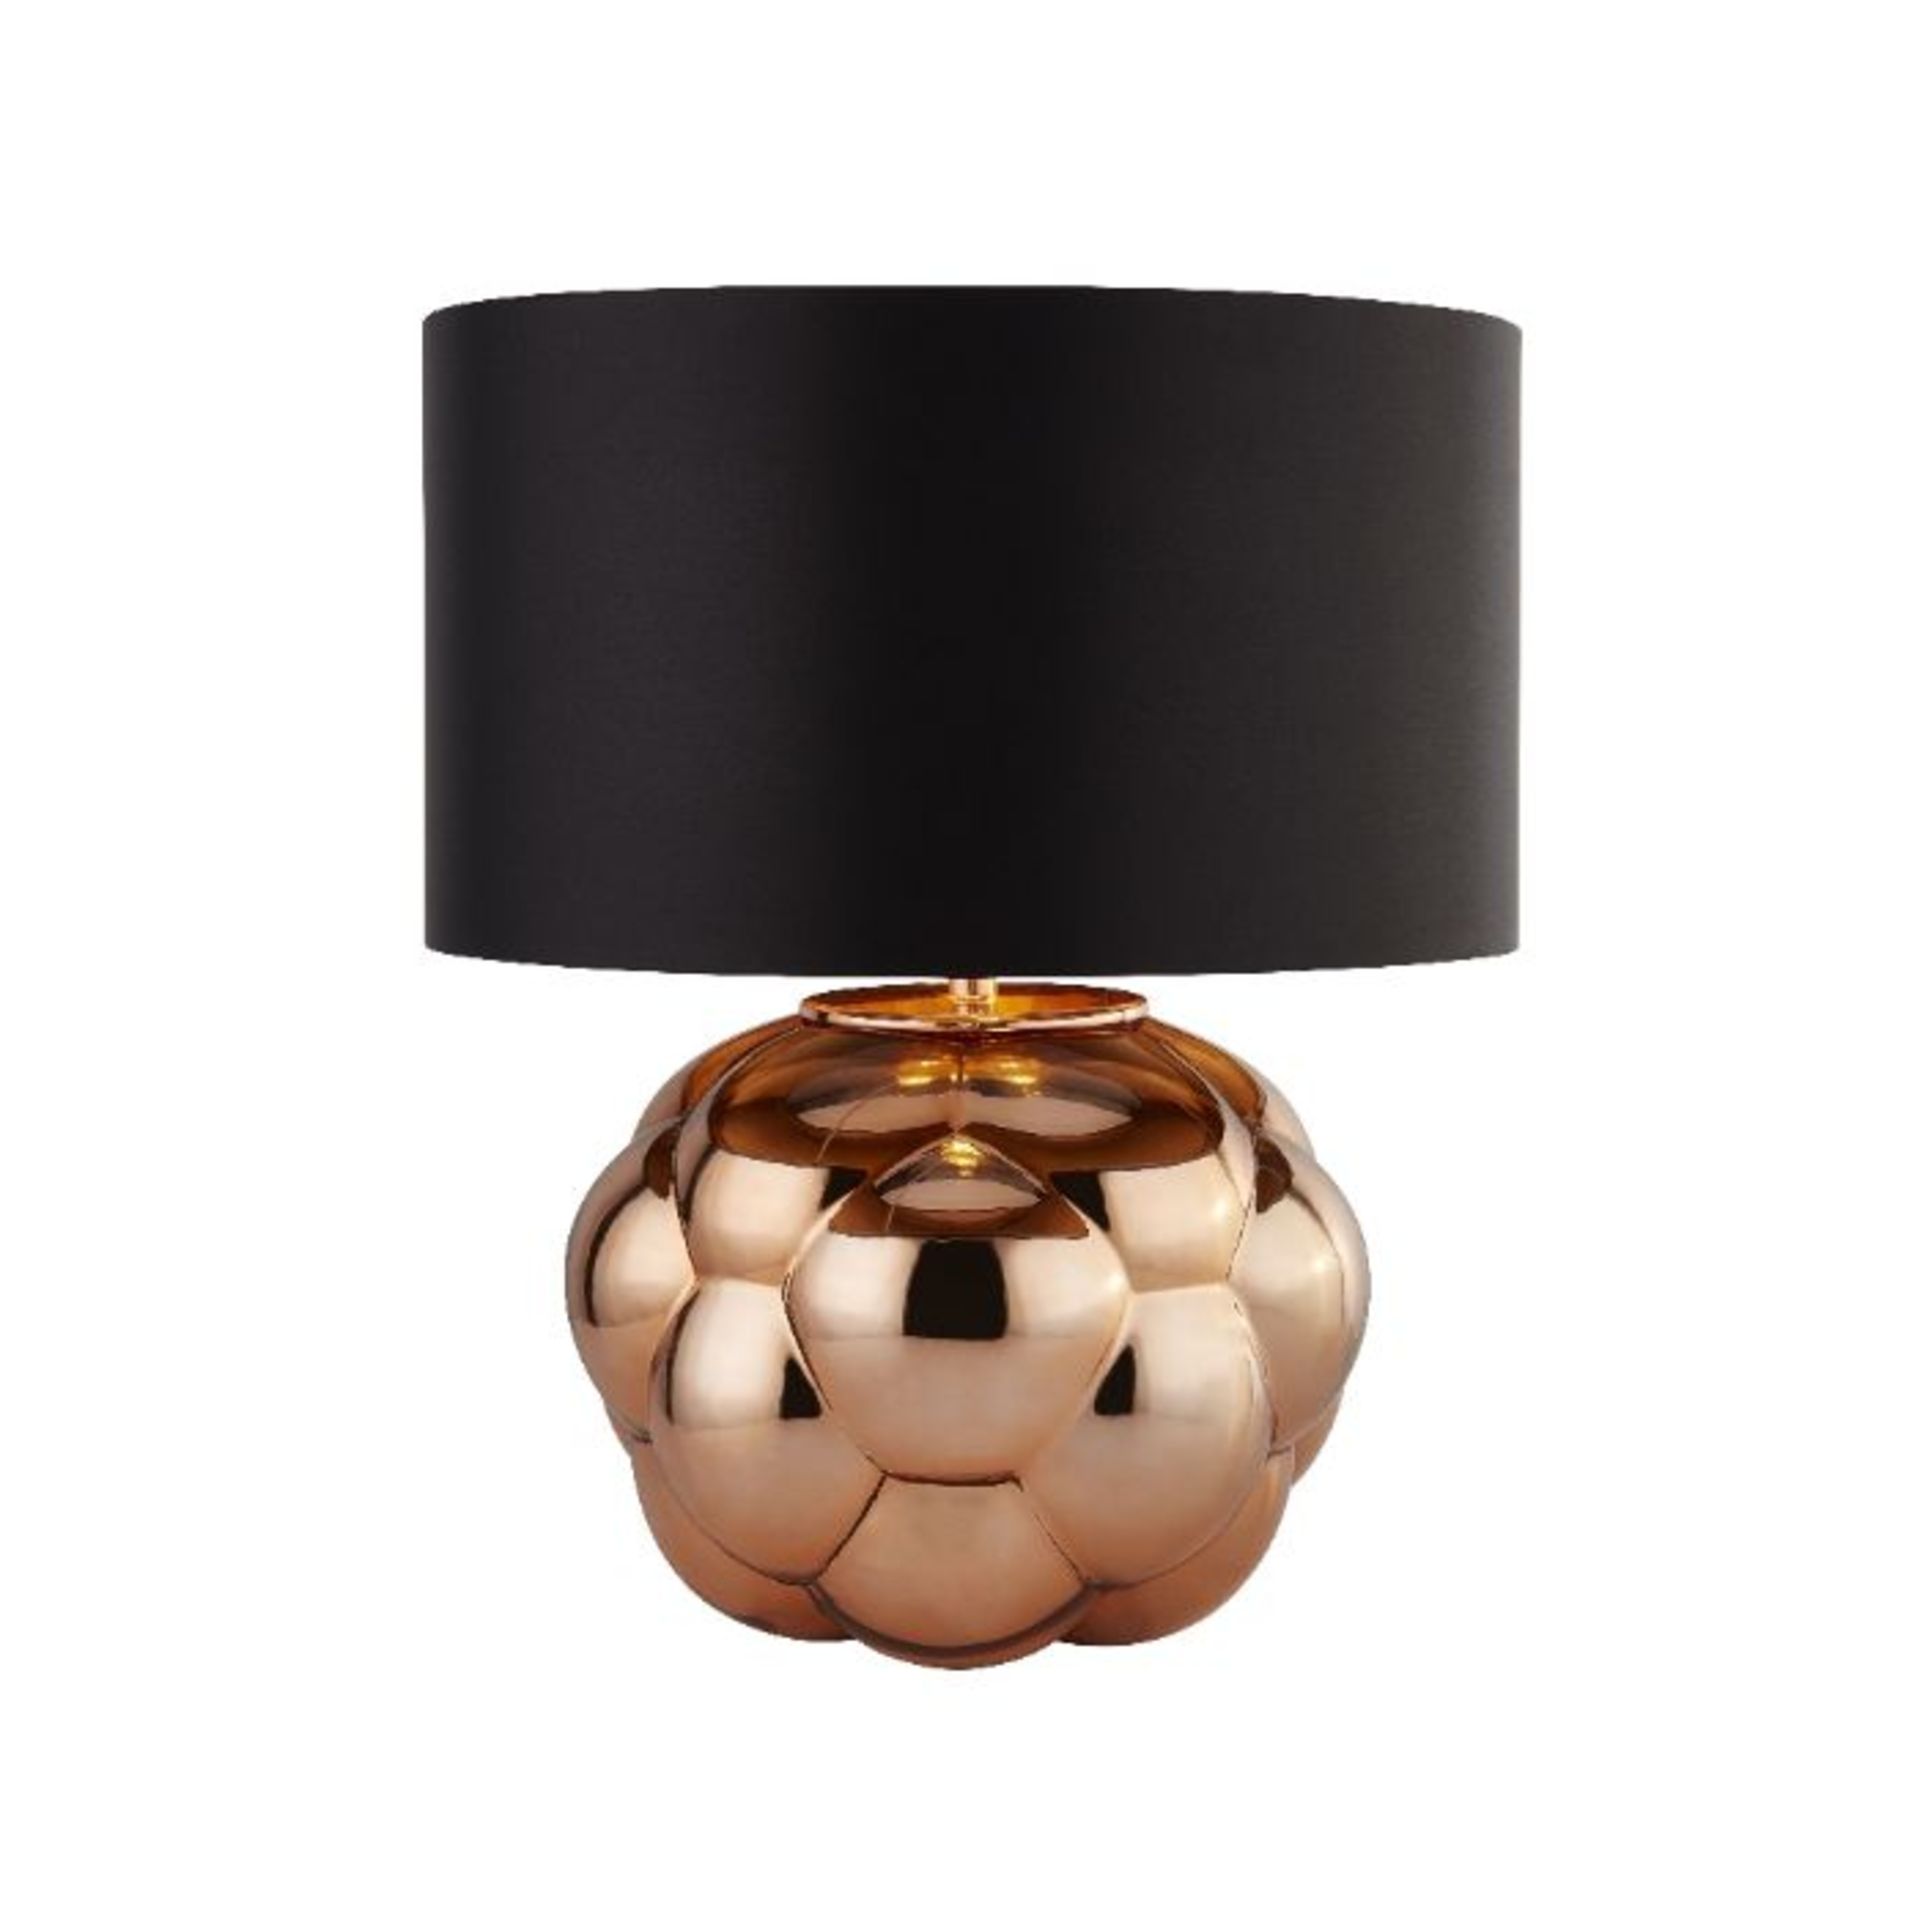 BRAND NEW 44CM BUBBLE STYLE COPPER GLASS TABLE LAMP WITH BLACK DRUM SHADE. 60W. - Beautiful table